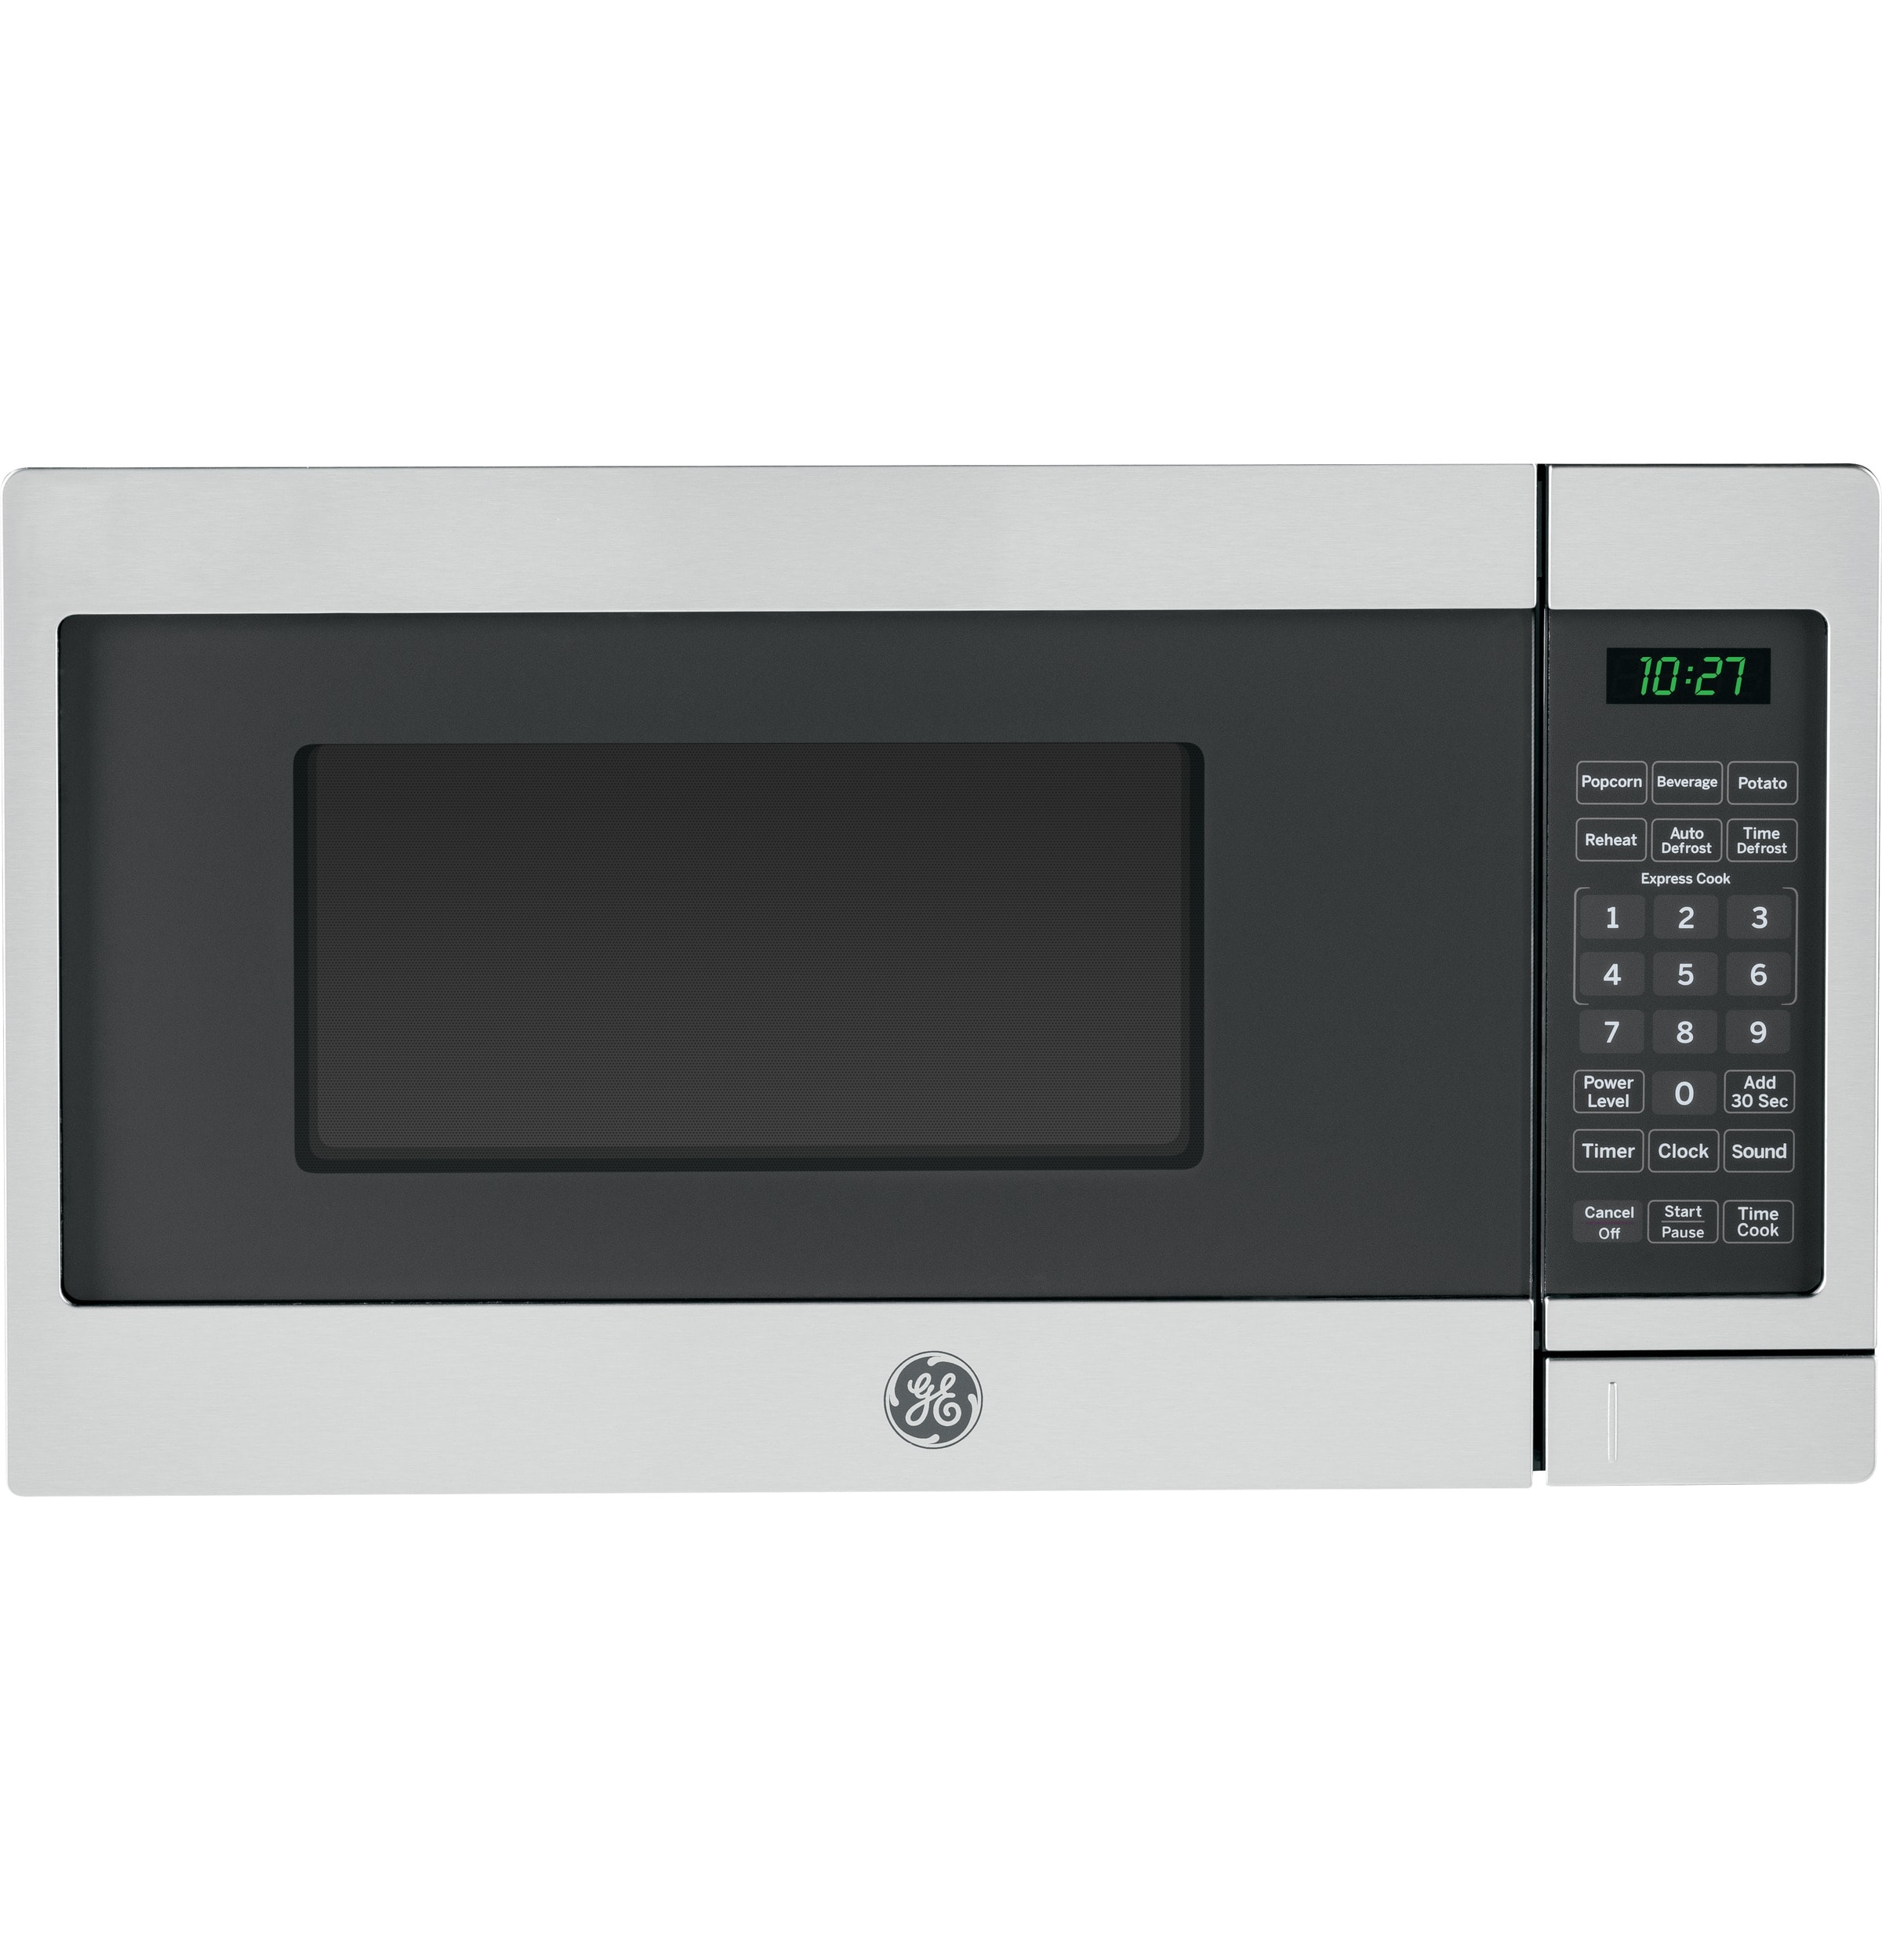 GE - 0.7 Cu. ft. Compact Microwave - Stainless Steel